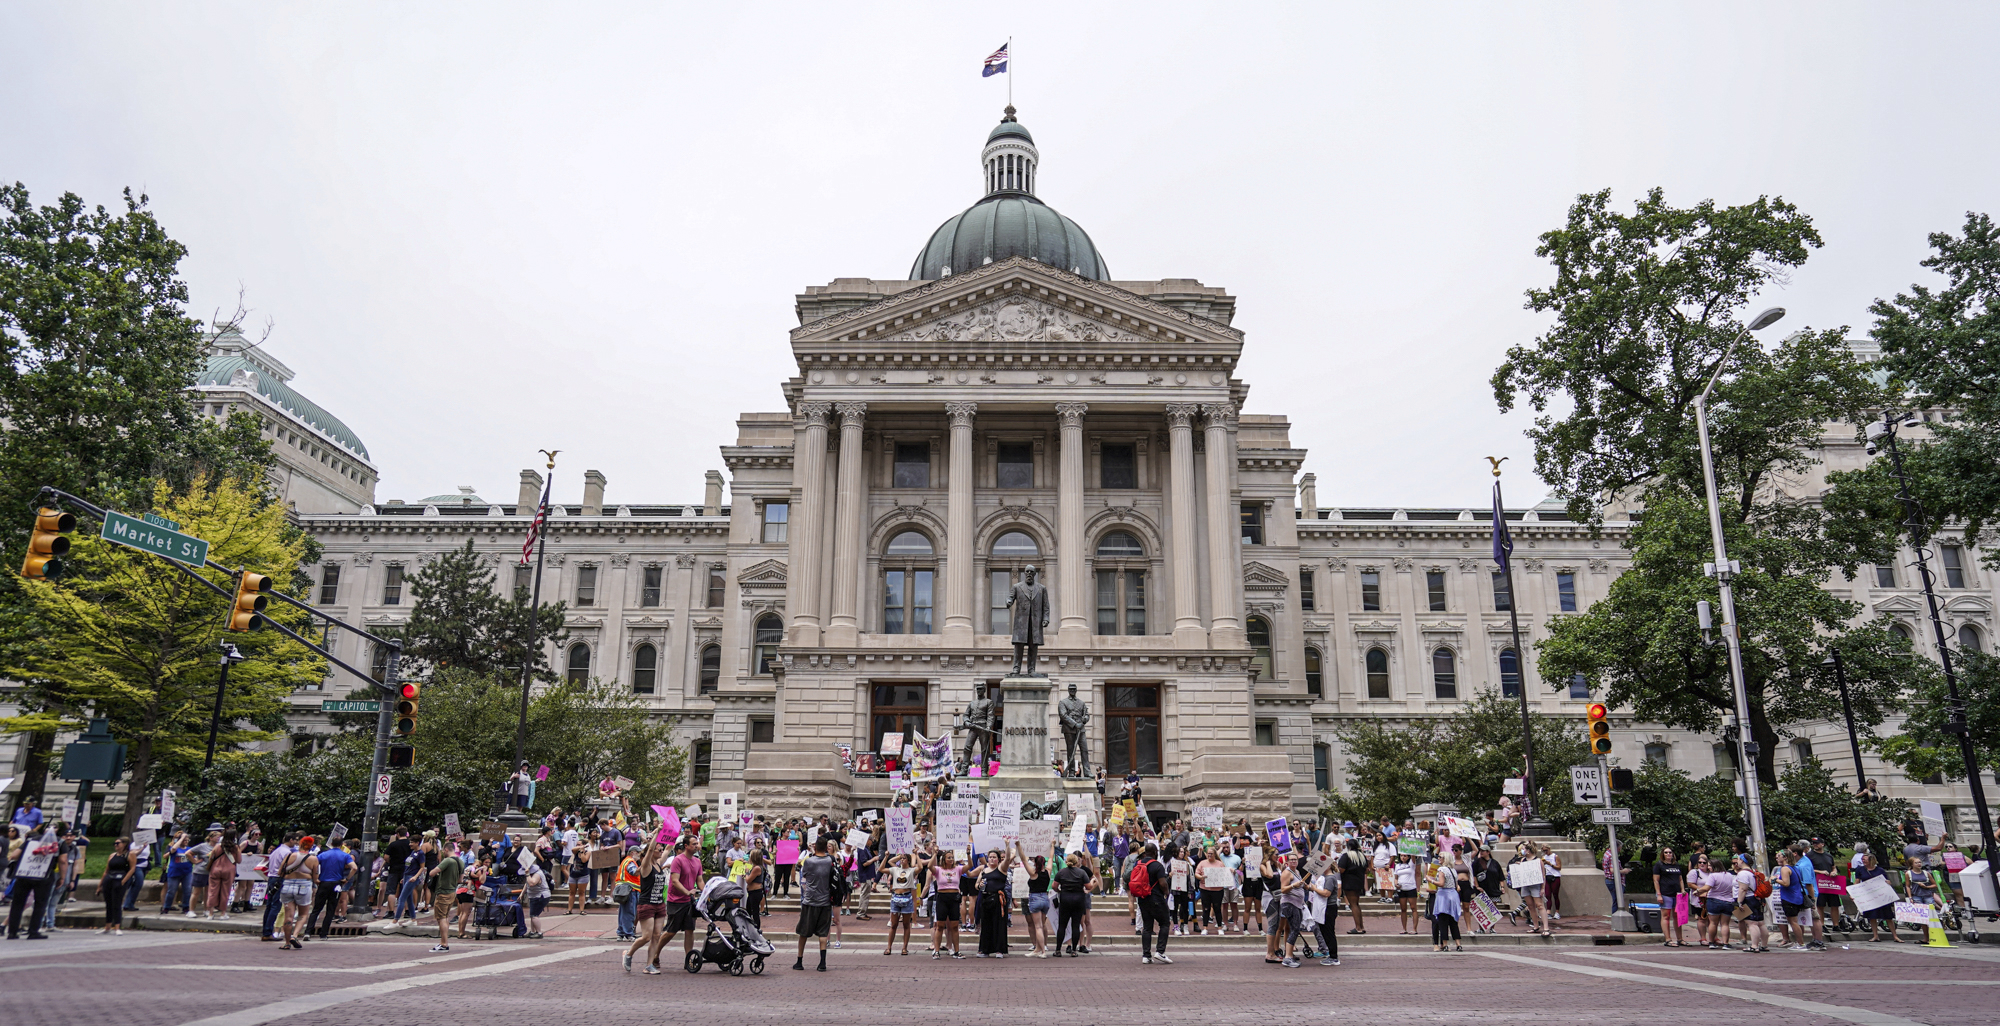 Indiana Senate to vote on near-total abortion ban in rare Saturday session